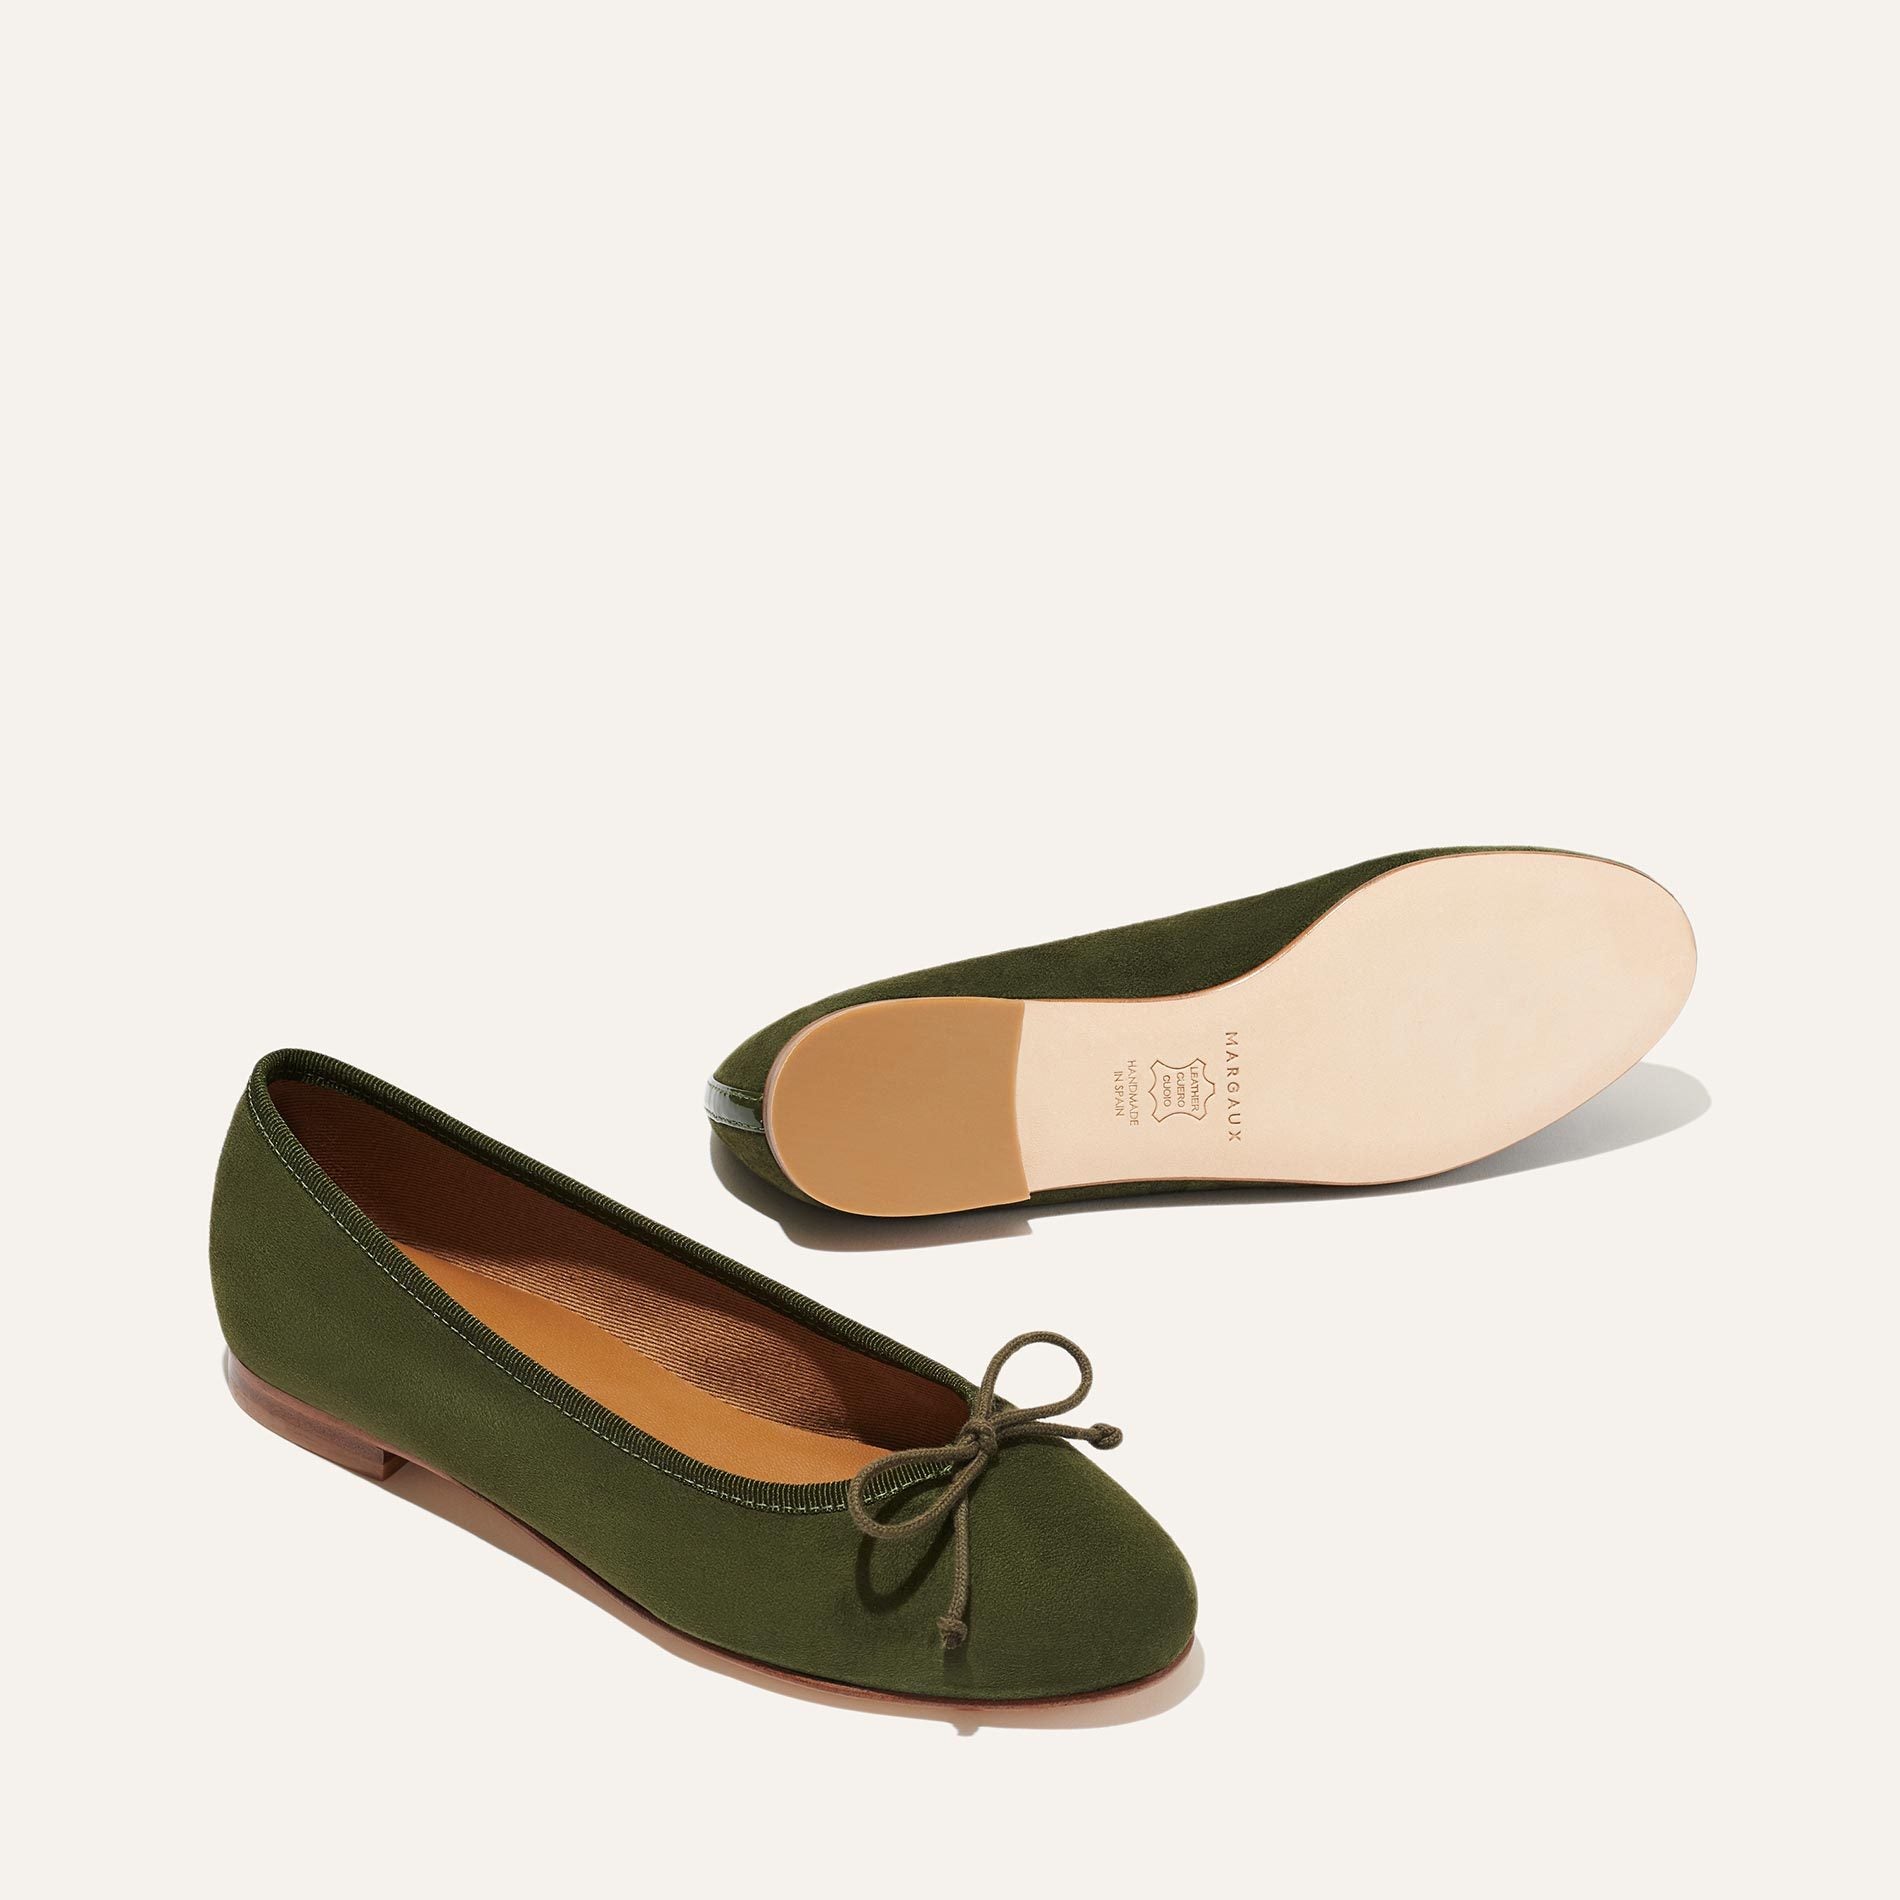 Demi-olive suede